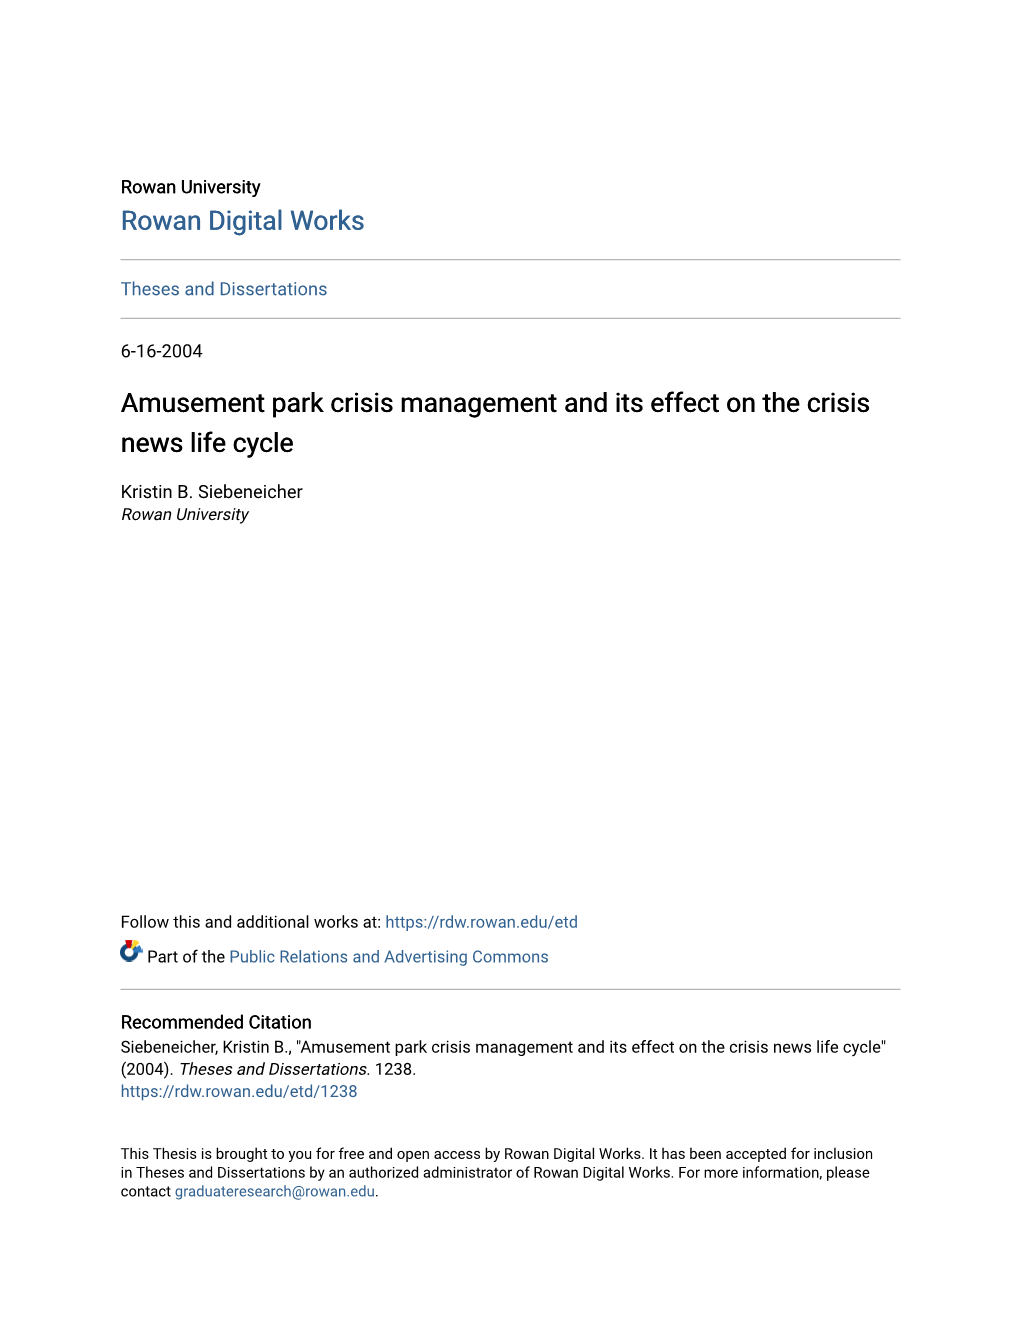 Amusement Park Crisis Management and Its Effect on the Crisis News Life Cycle